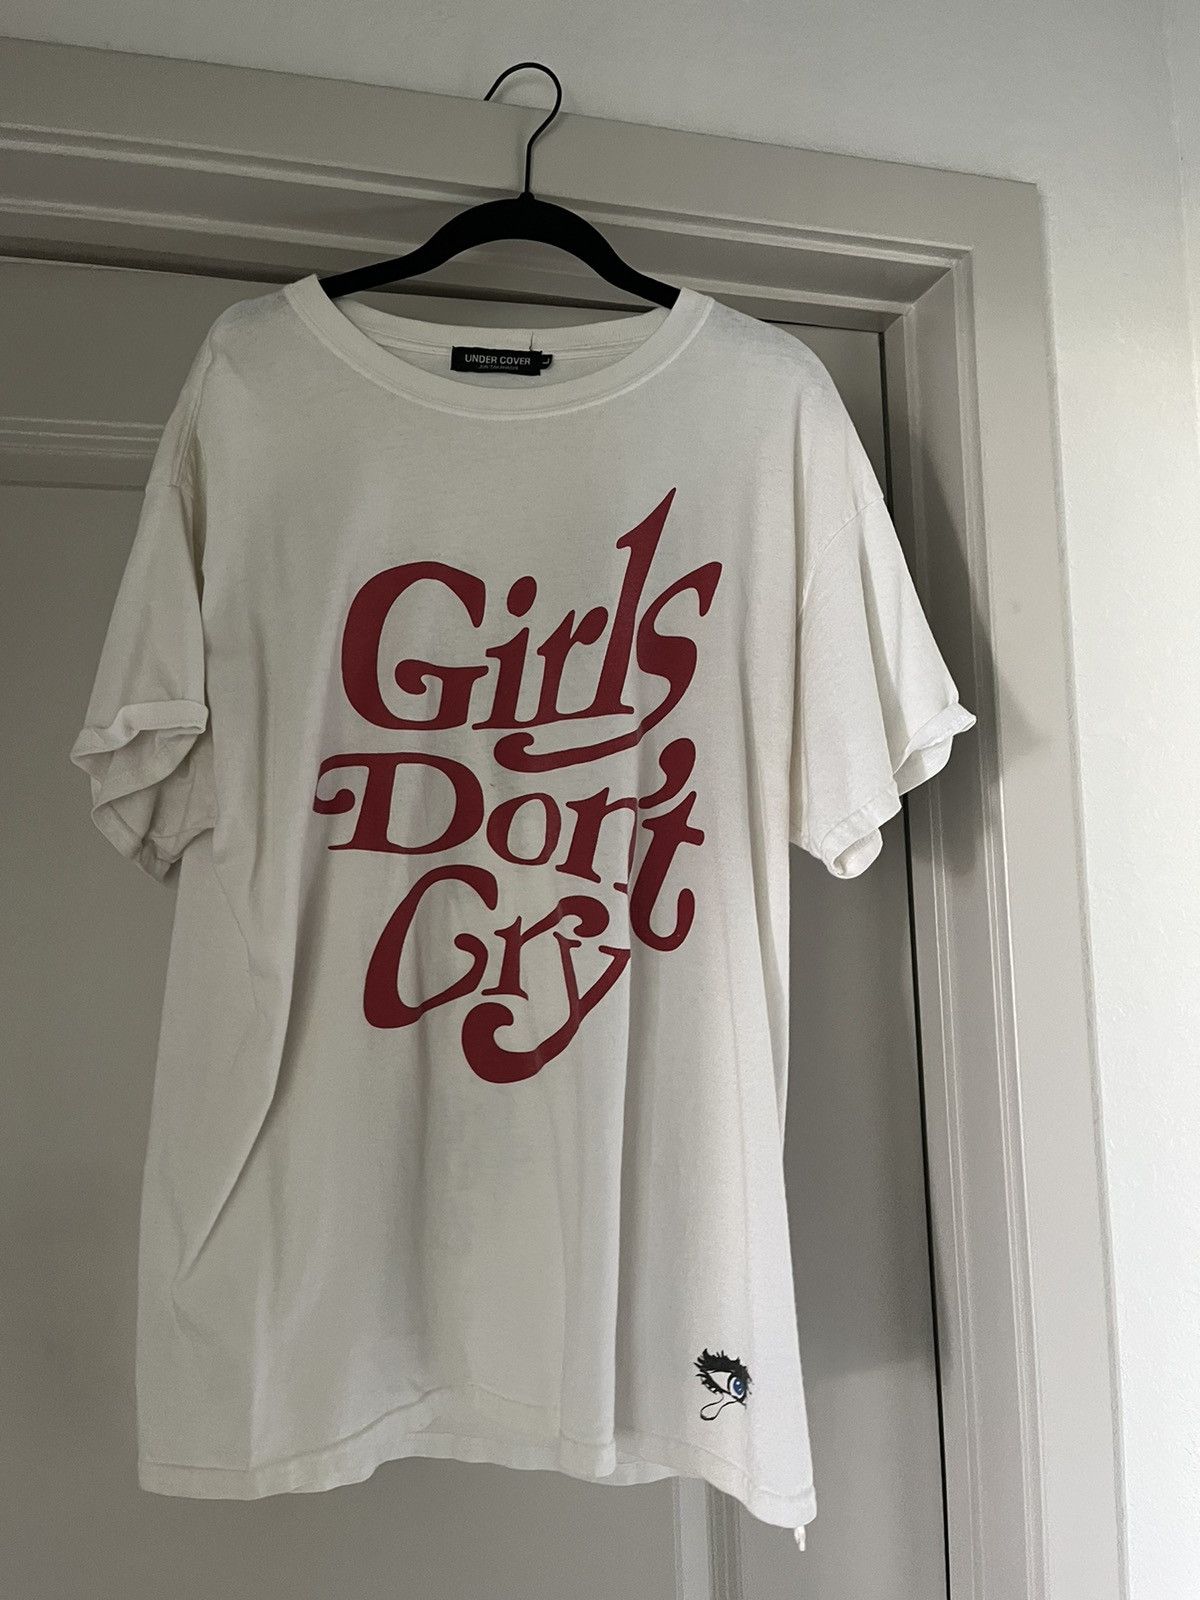 Girls Dont Cry Undercover Tee | Grailed